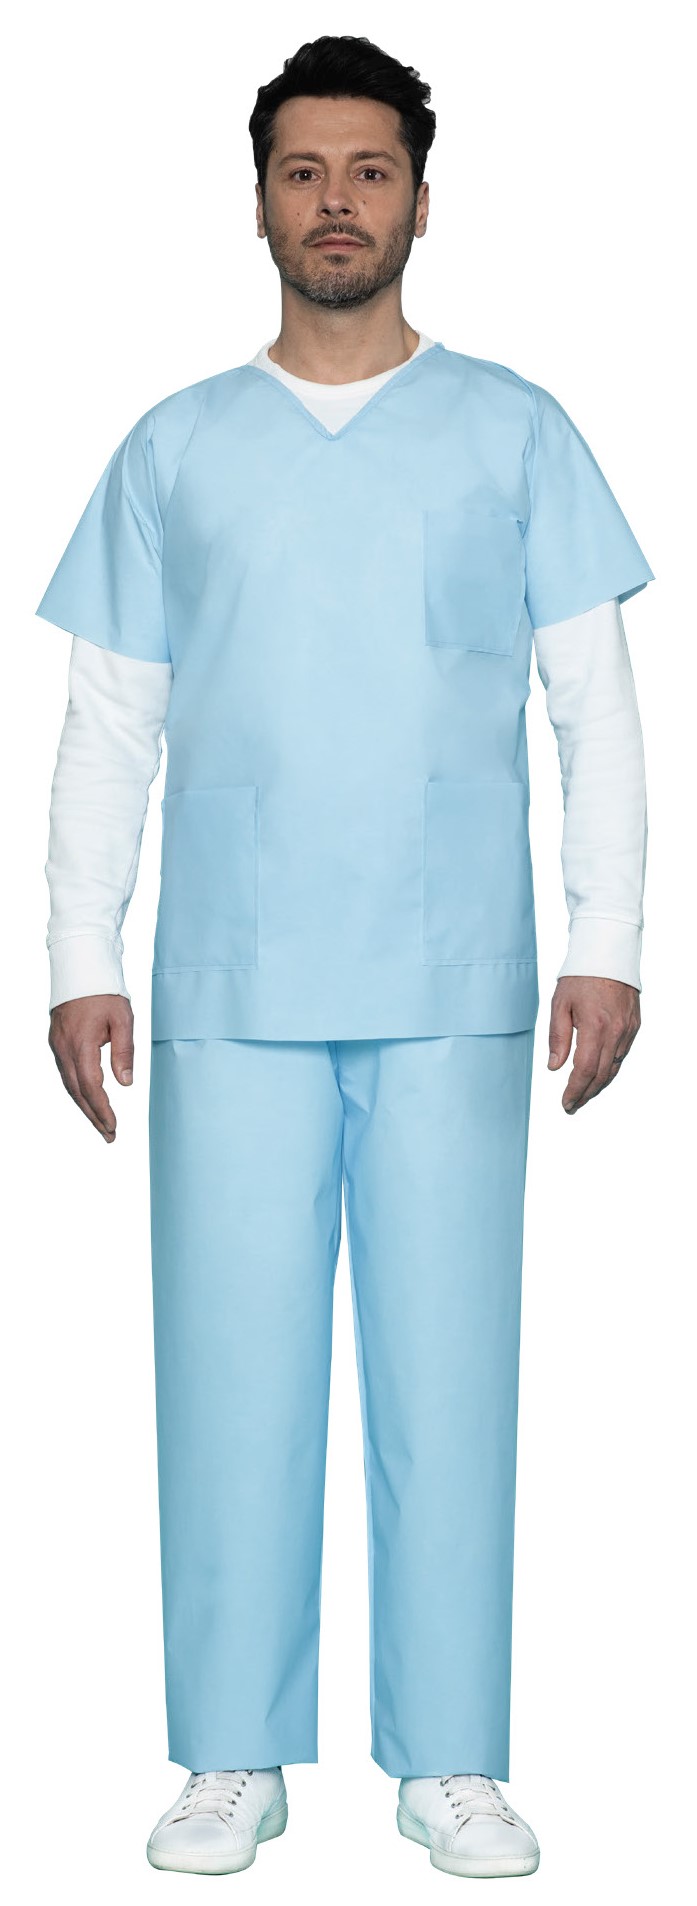 Single-use Doctor Suit - SMS